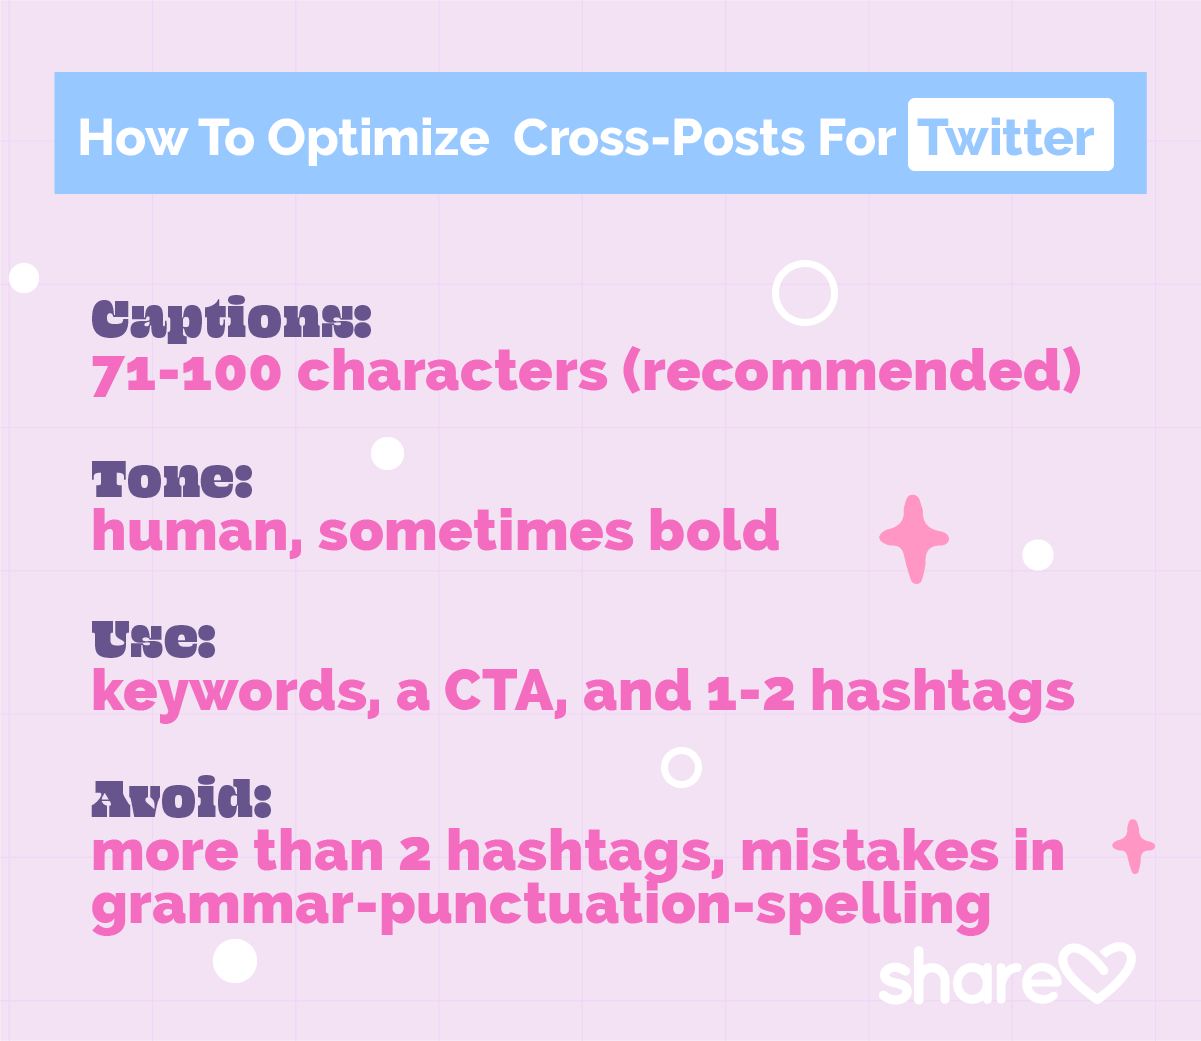 How To Optimize Cross-Posts For Twitter